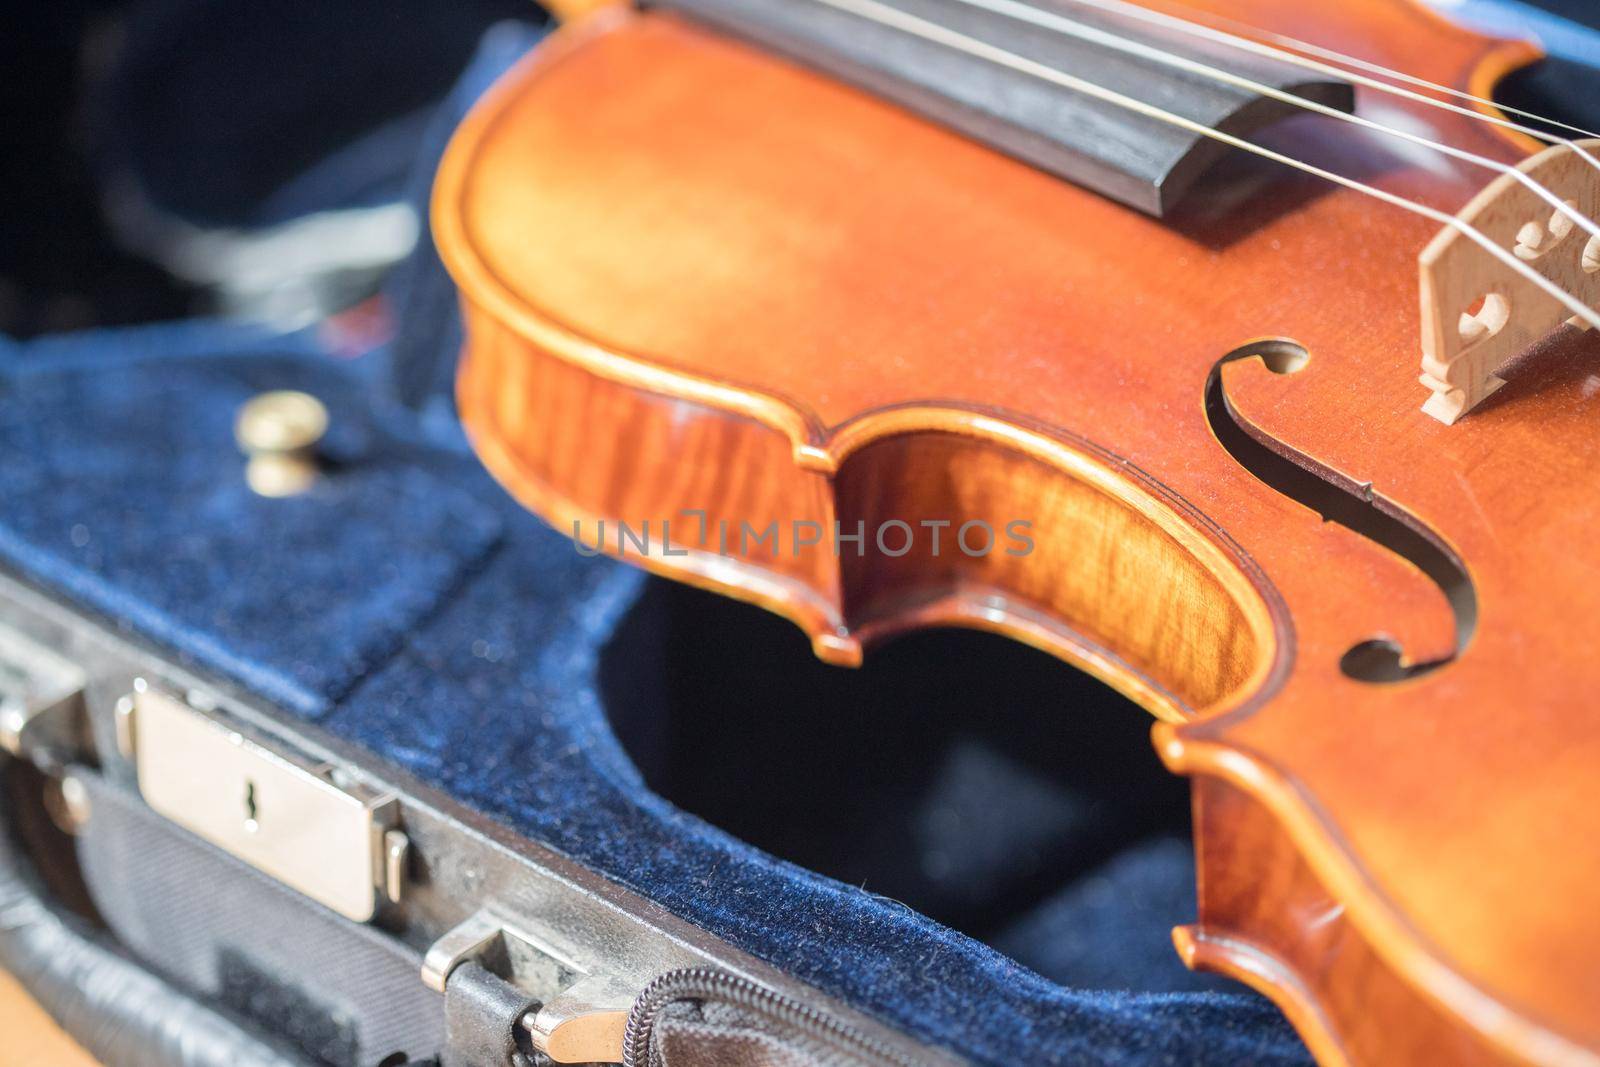 Violin music instrument concept: vintage style close up of violin by Daxenbichler